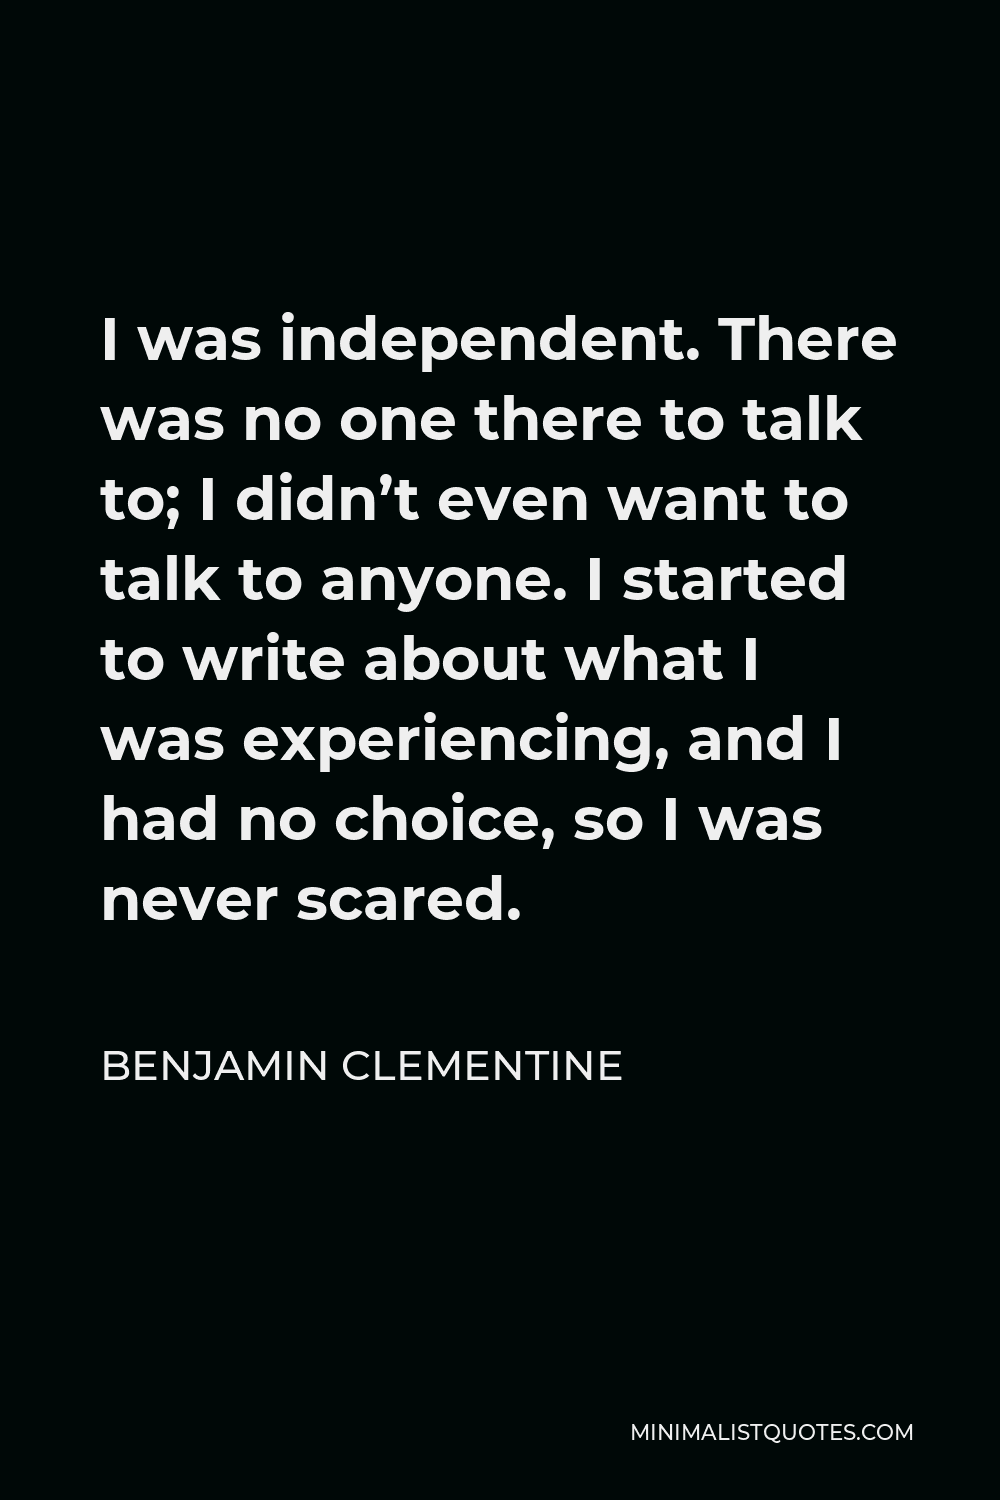 Benjamin Clementine Quote - I was independent. There was no one there to talk to; I didn’t even want to talk to anyone. I started to write about what I was experiencing, and I had no choice, so I was never scared.